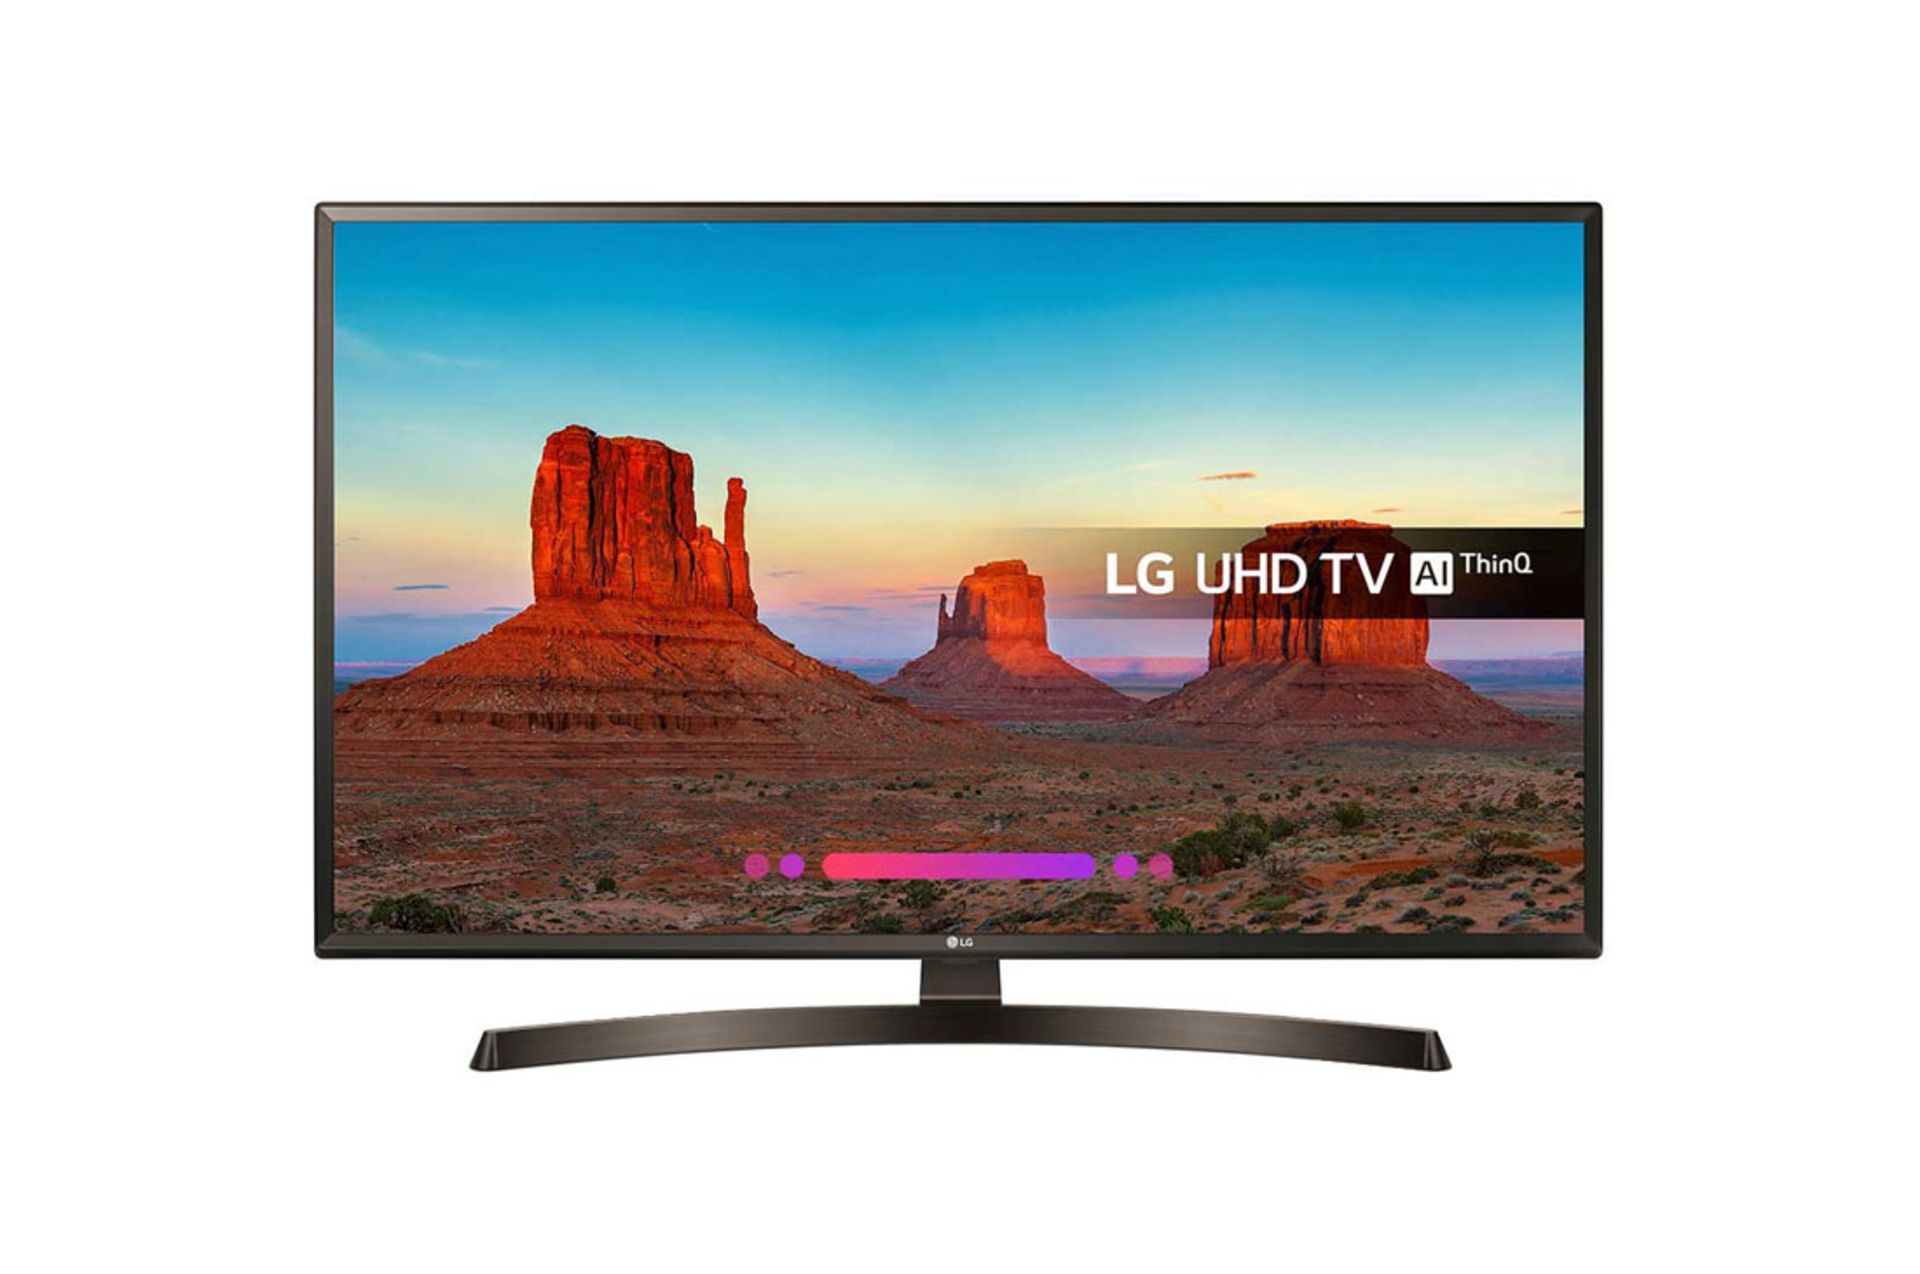 V Grade A LG 49 Inch ACTIVE HDR 4K ULTRA HD LED SMART TV WITH FREEVIEW HD & WEBOS 4.0 & WIFI - AI TV